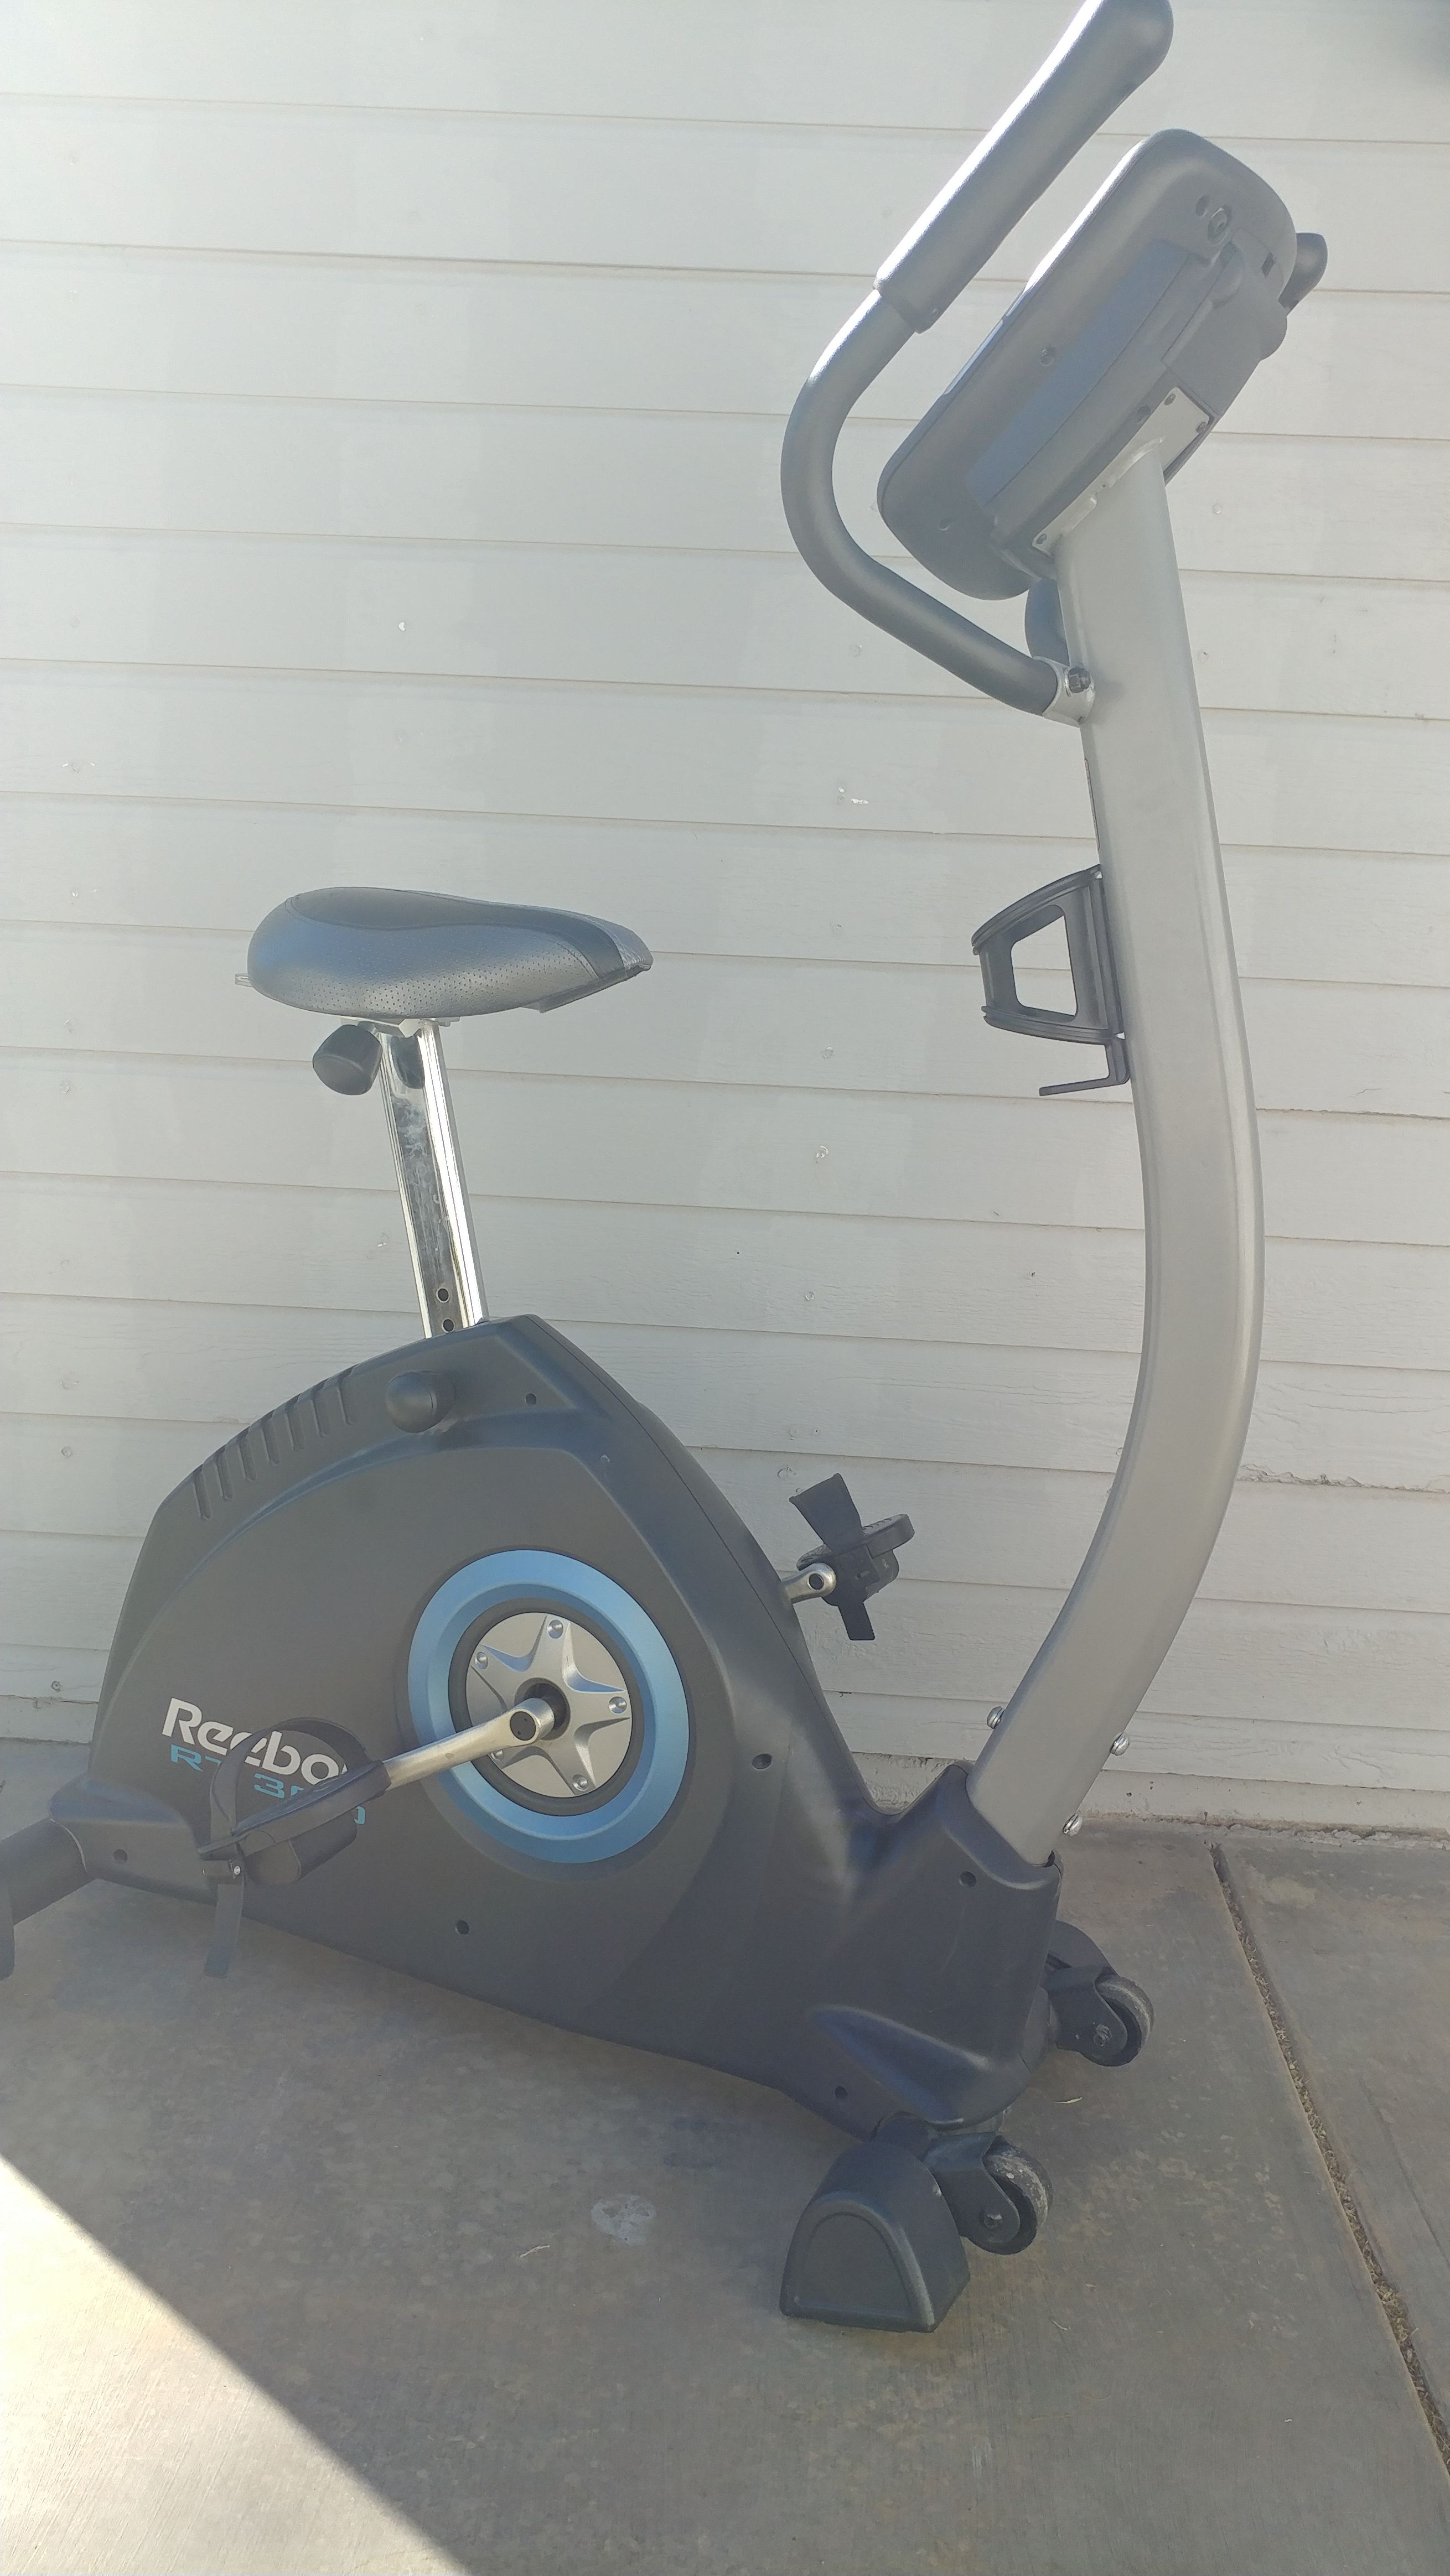 Repelente Arruinado Drama Reebok RT 300 Exerplay Exercise Bike for Sale in Yucaipa, CA - OfferUp